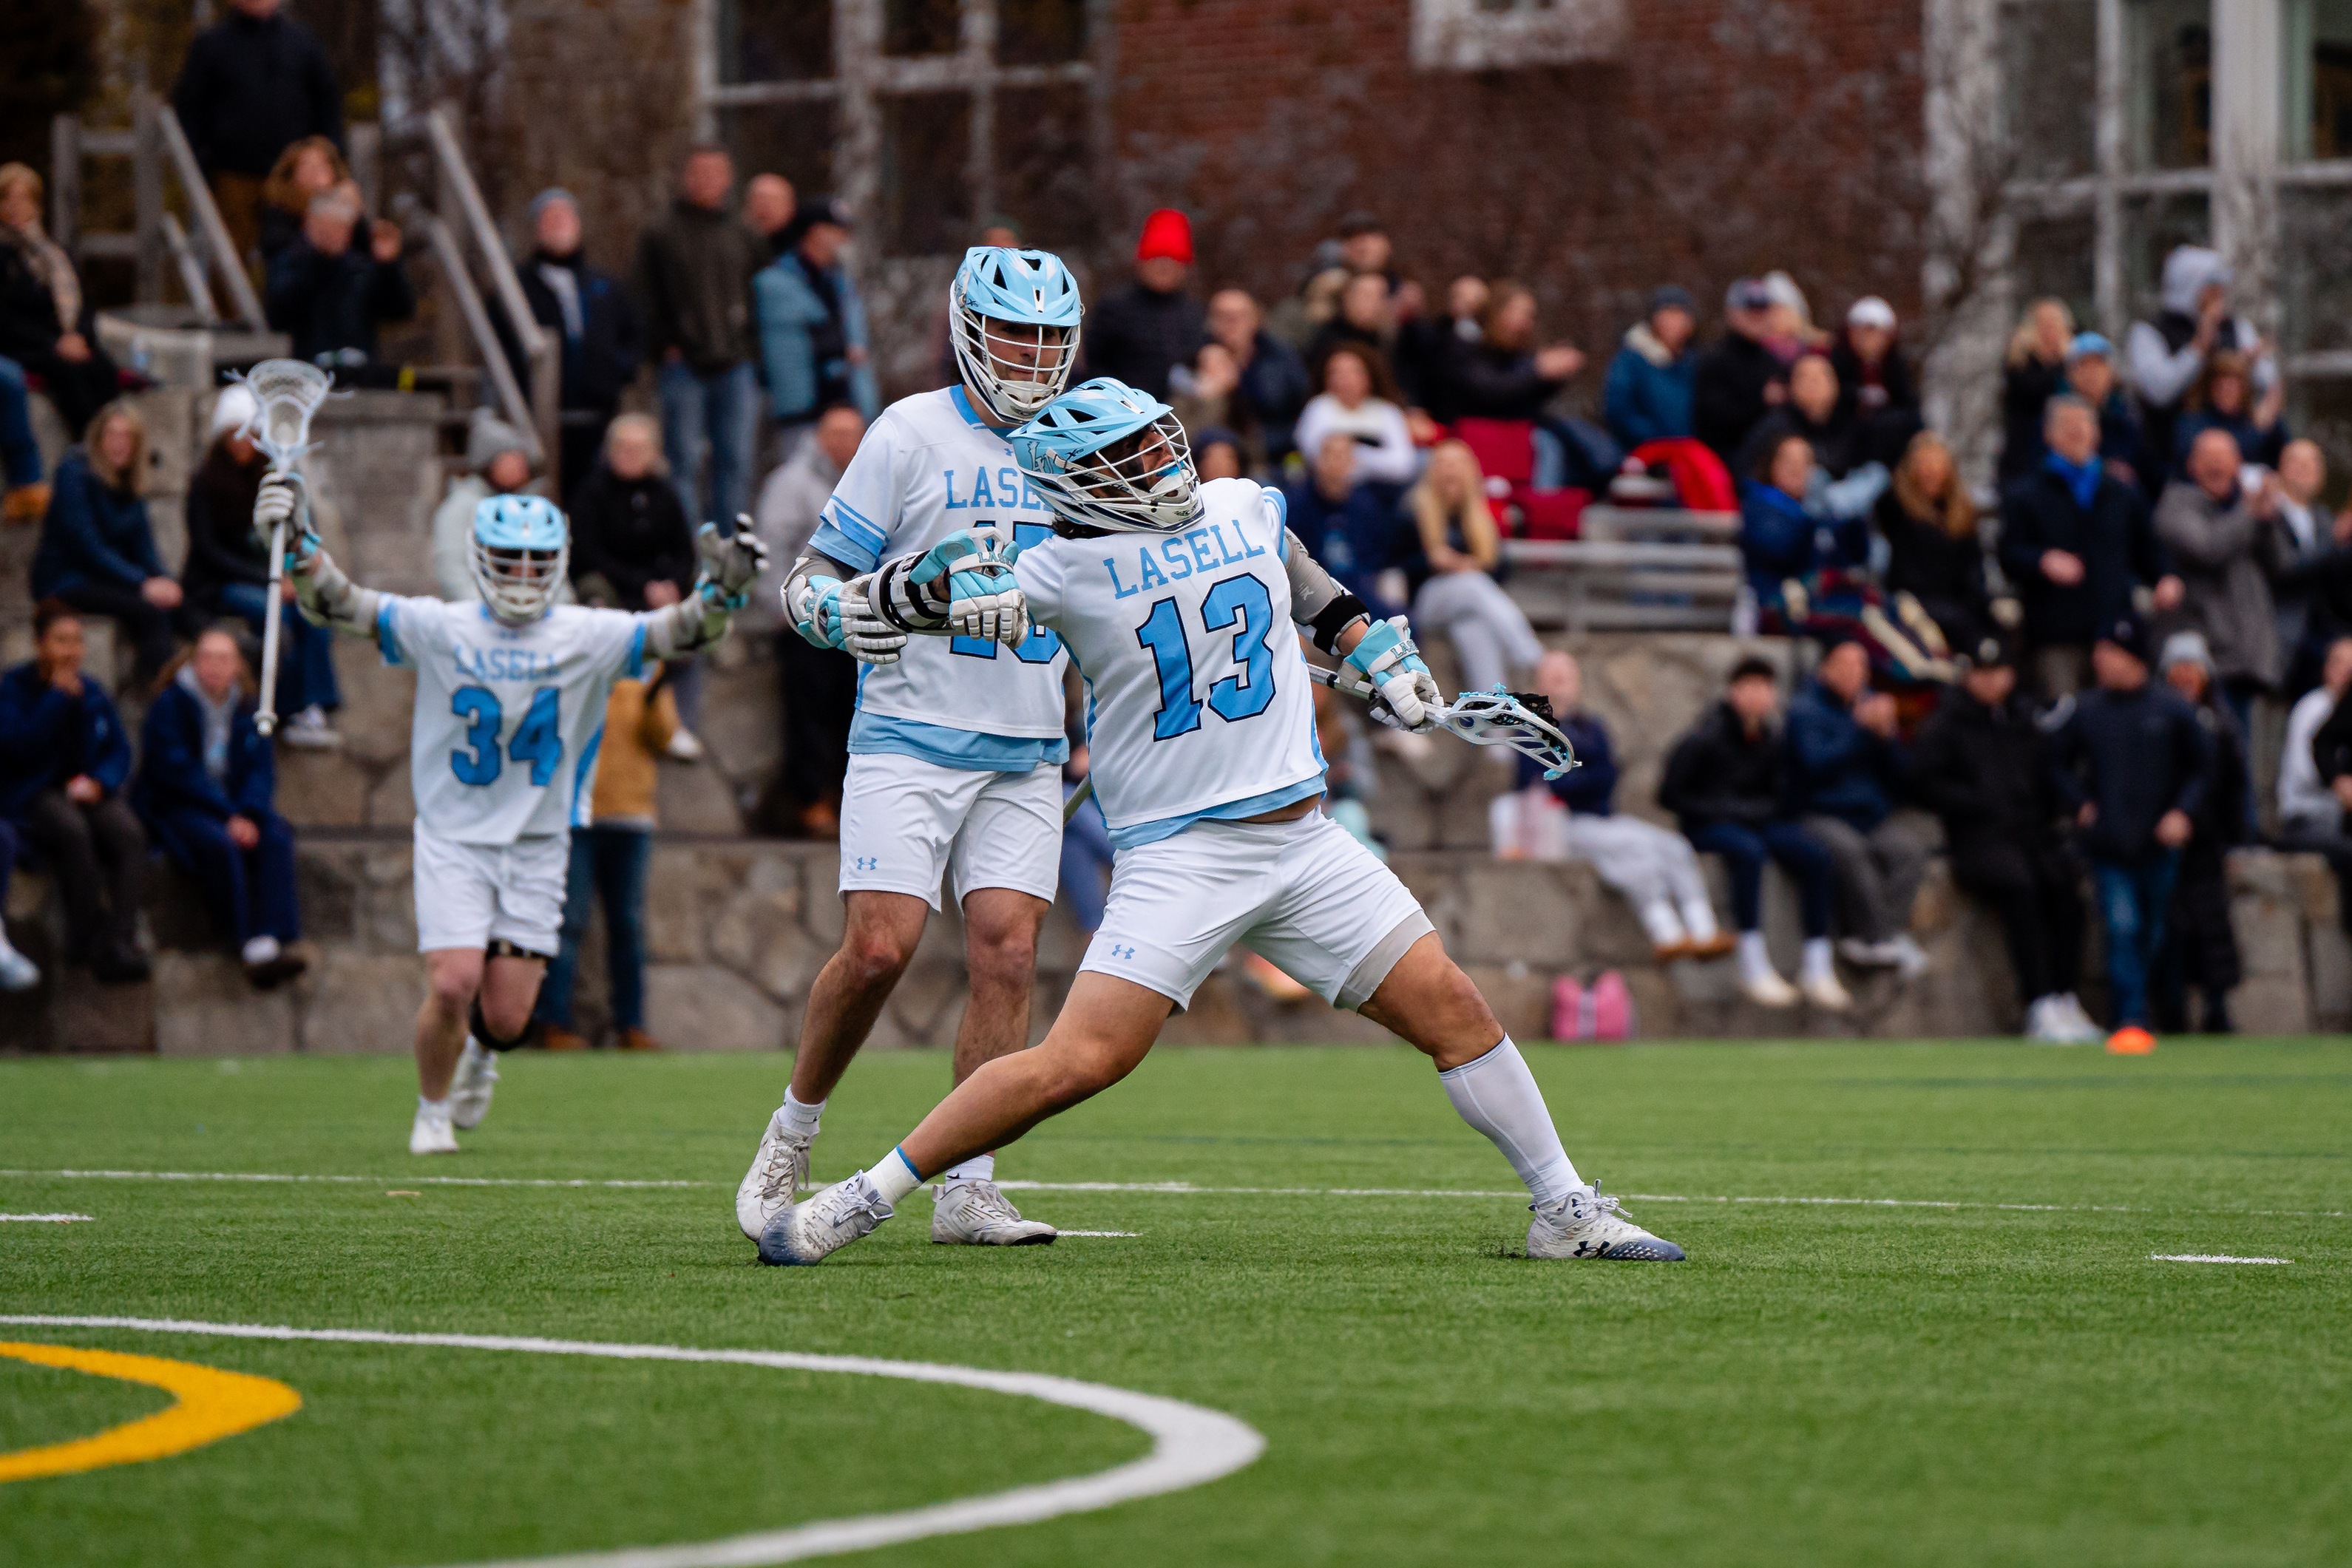 MLax: Buzzer Beater Pushes Lasers Past Plymouth State